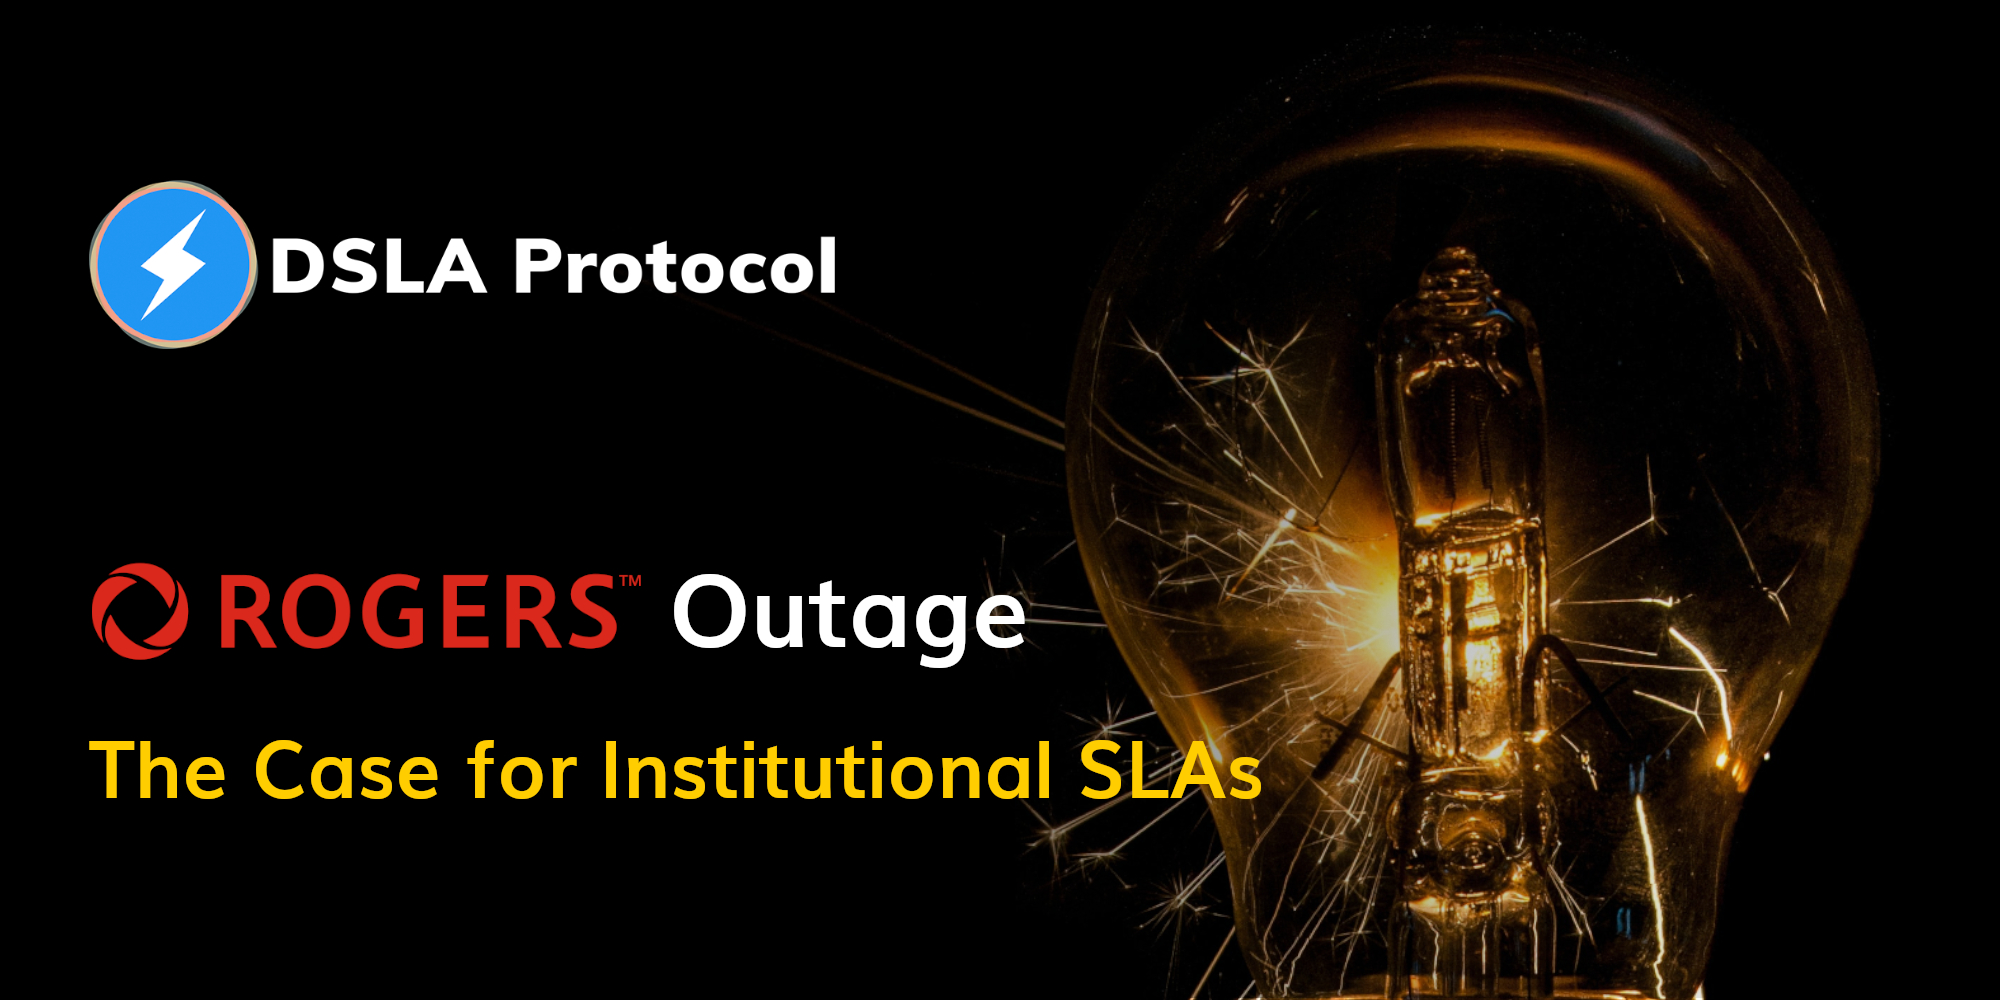 The Case for Institutional SLAs